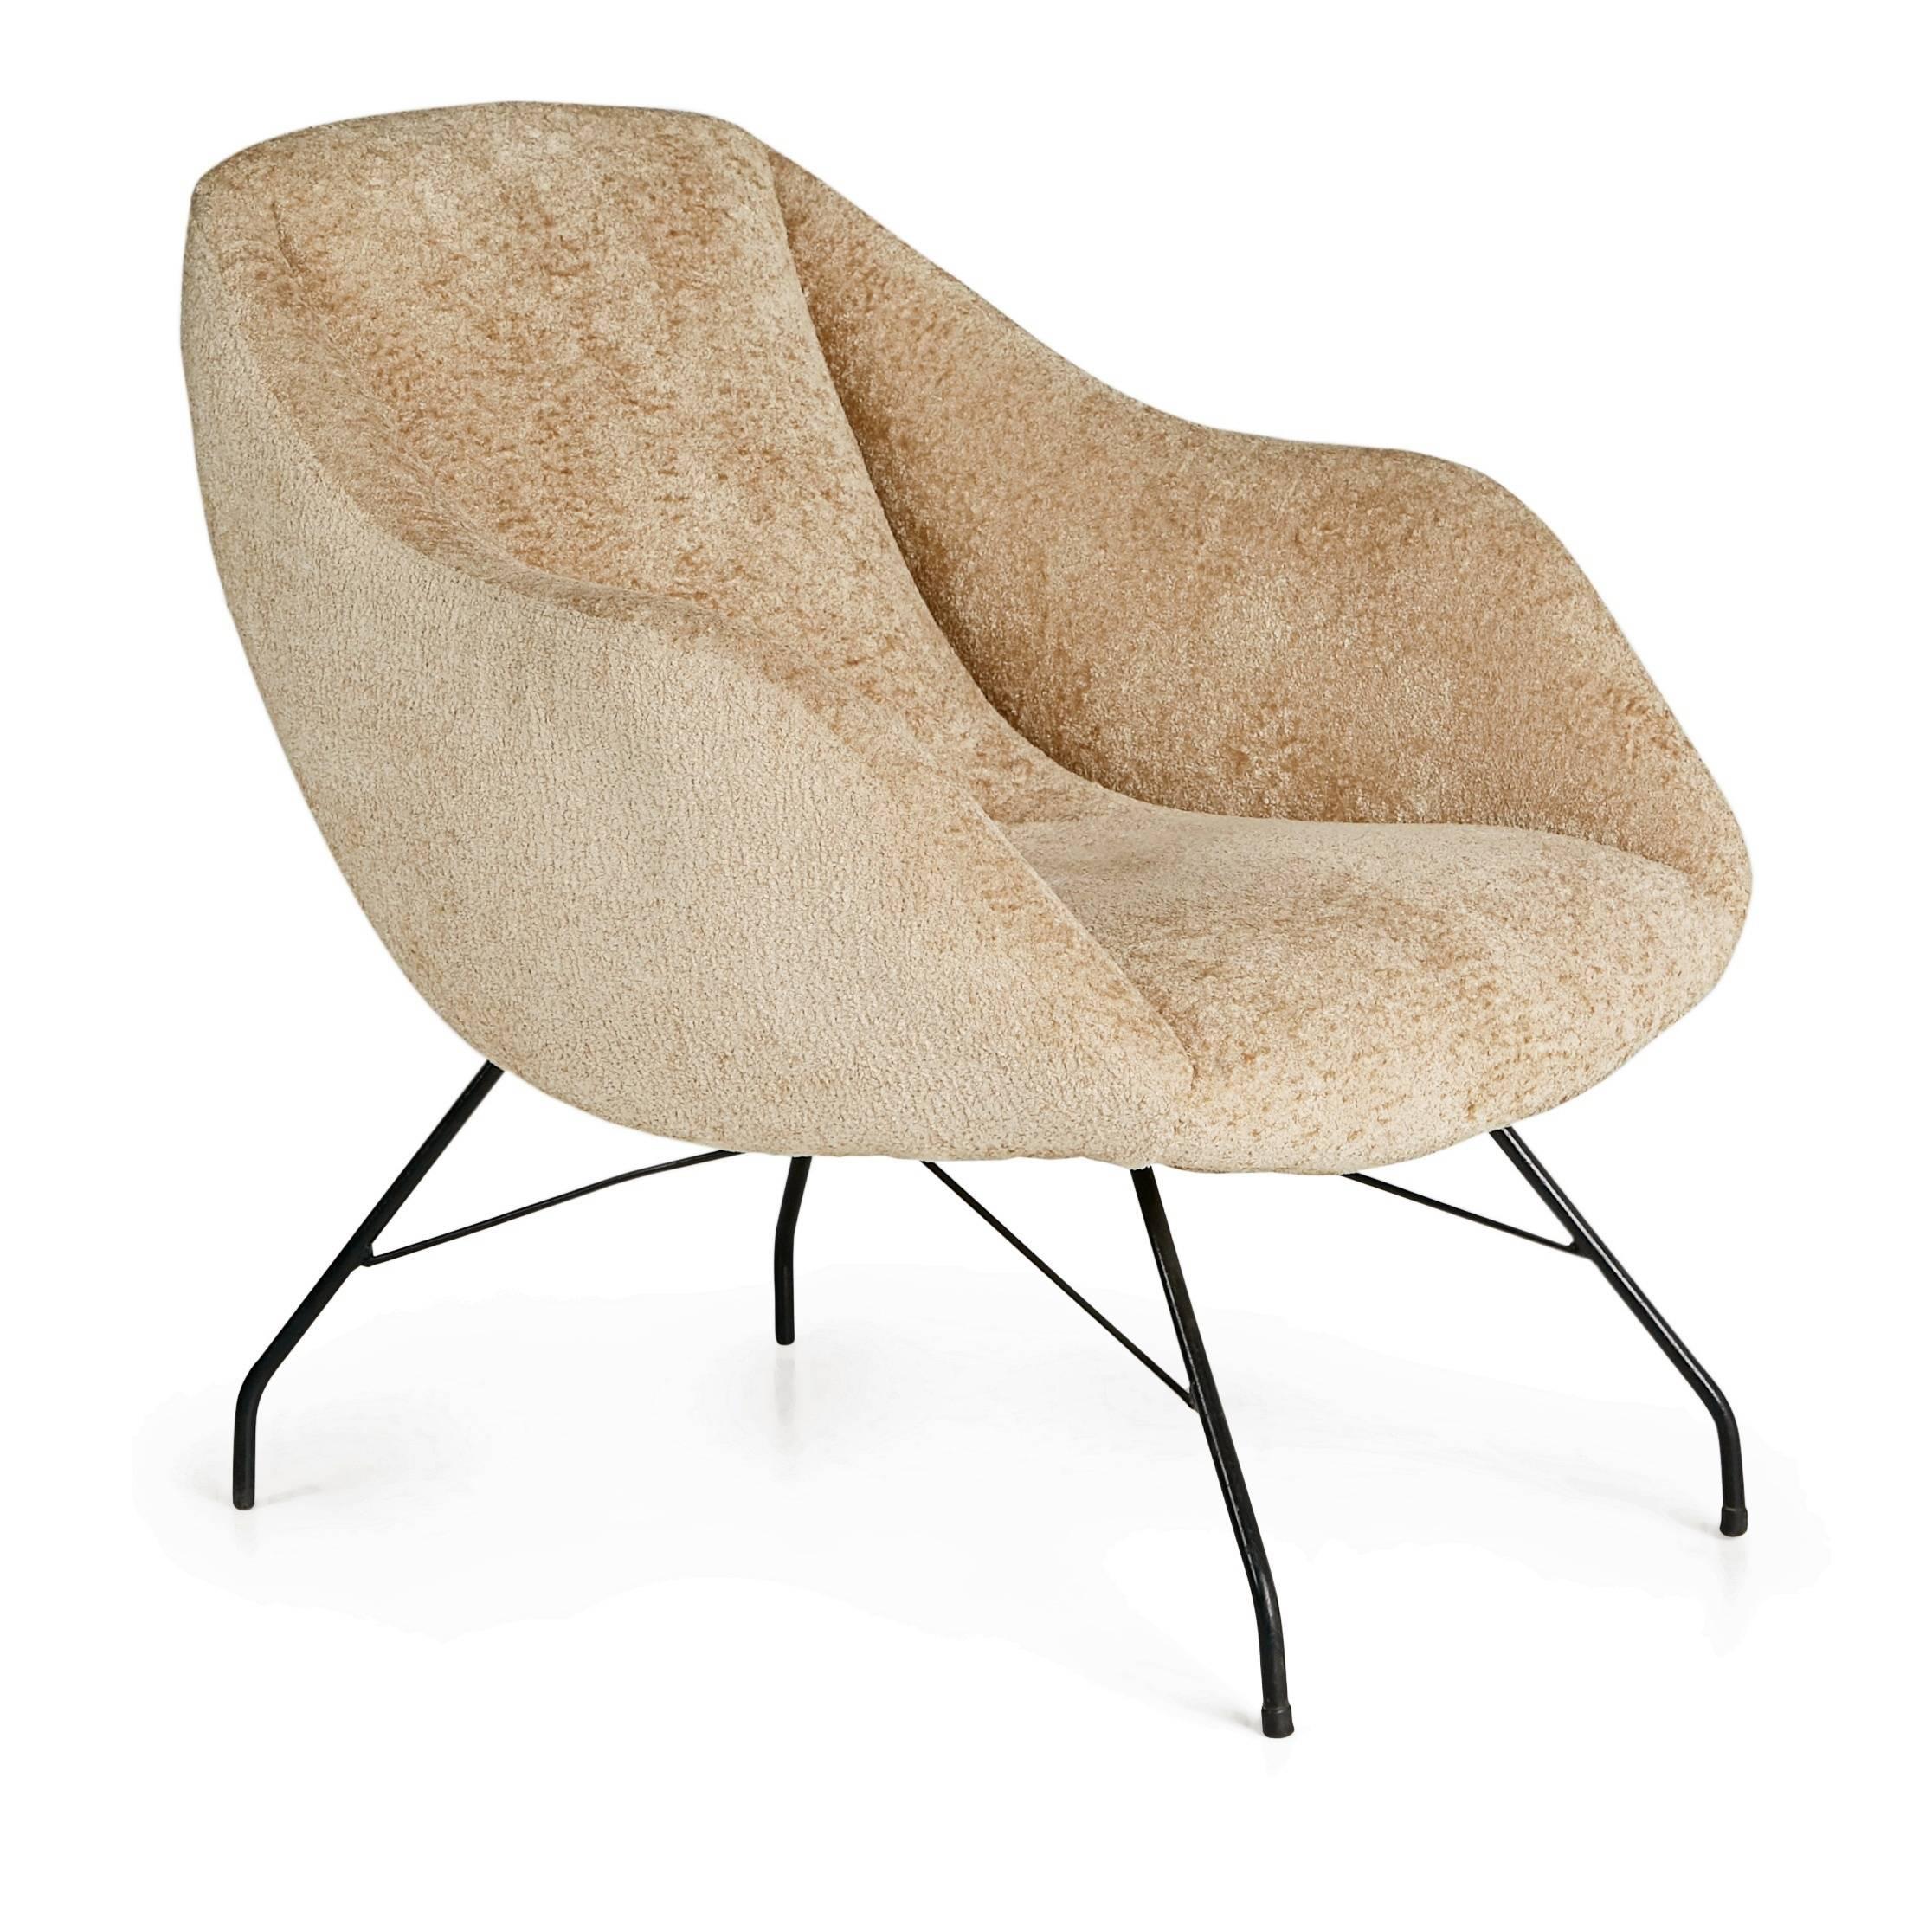 Recently imported from a private collector in Brazil, this arm chair by Martin Eisler and Carlo Hauner for Forma, Brazil, encapsulates the quality and innovation of their designs. This elegant scoop chair with its slightly reclined back retains the